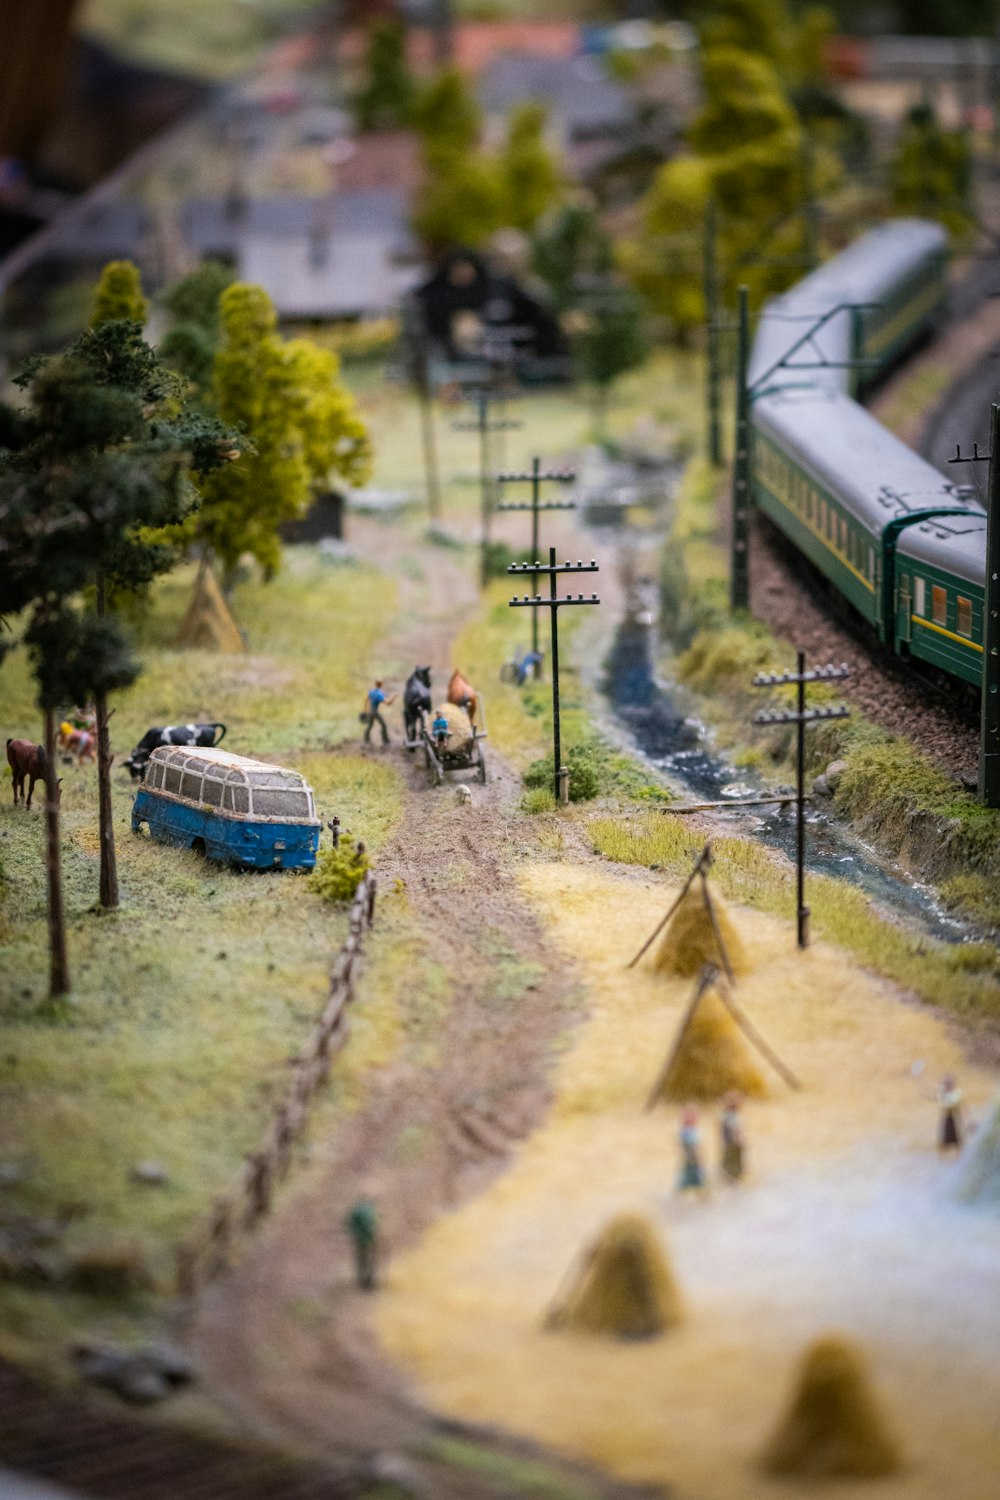 a model of a train station with a train on the tracks